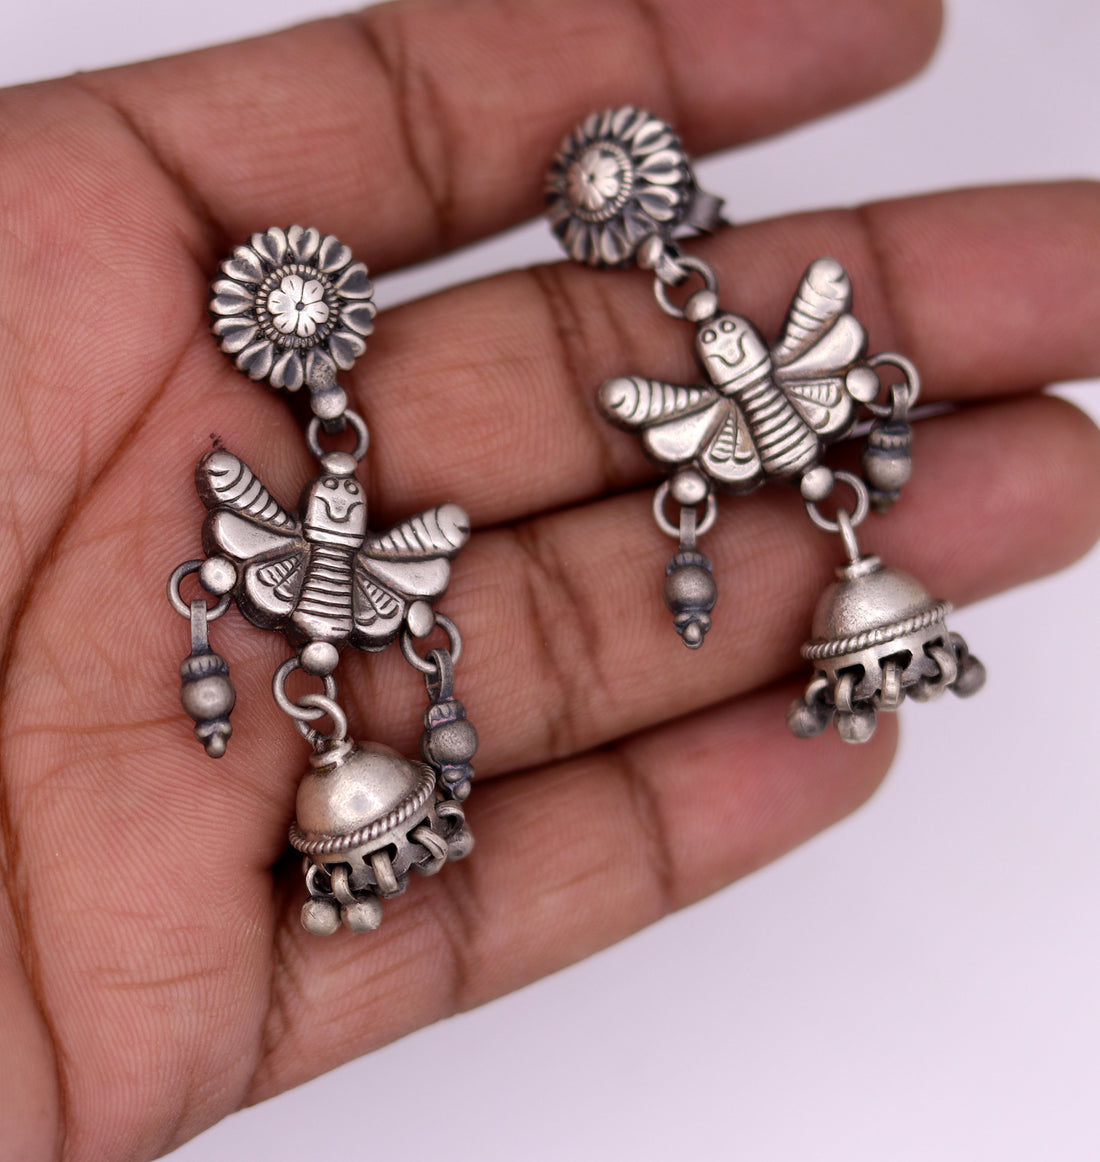 925 sterling silver fabulous butterfly design handmade stud earrings awesome wedding party girl's earrings tribal jewelry India s456 - TRIBAL ORNAMENTS